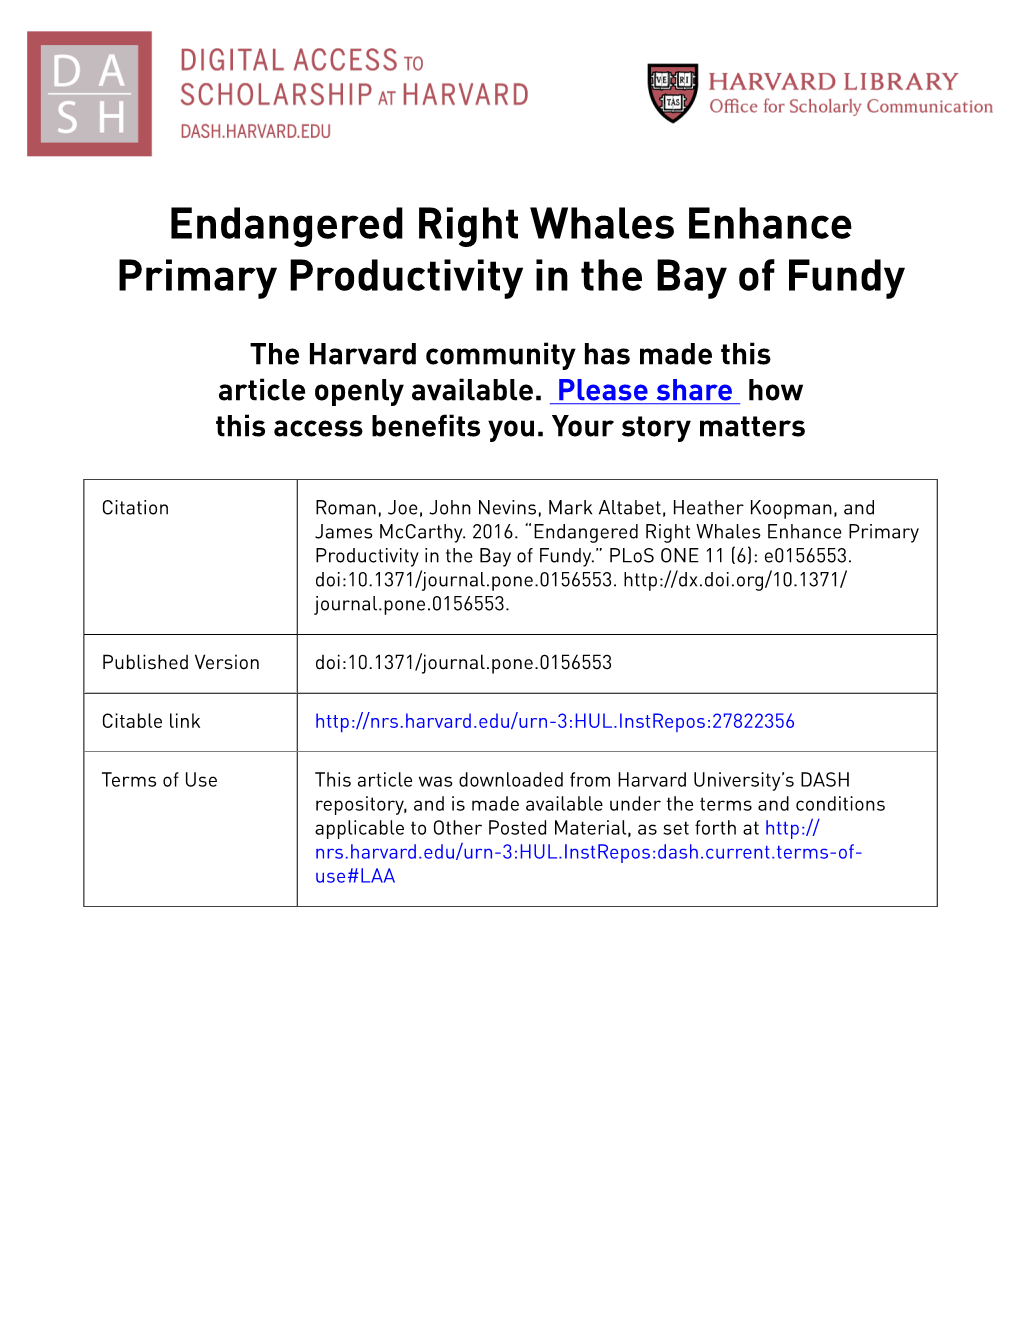 Endangered Right Whales Enhance Primary Productivity in the Bay of Fundy